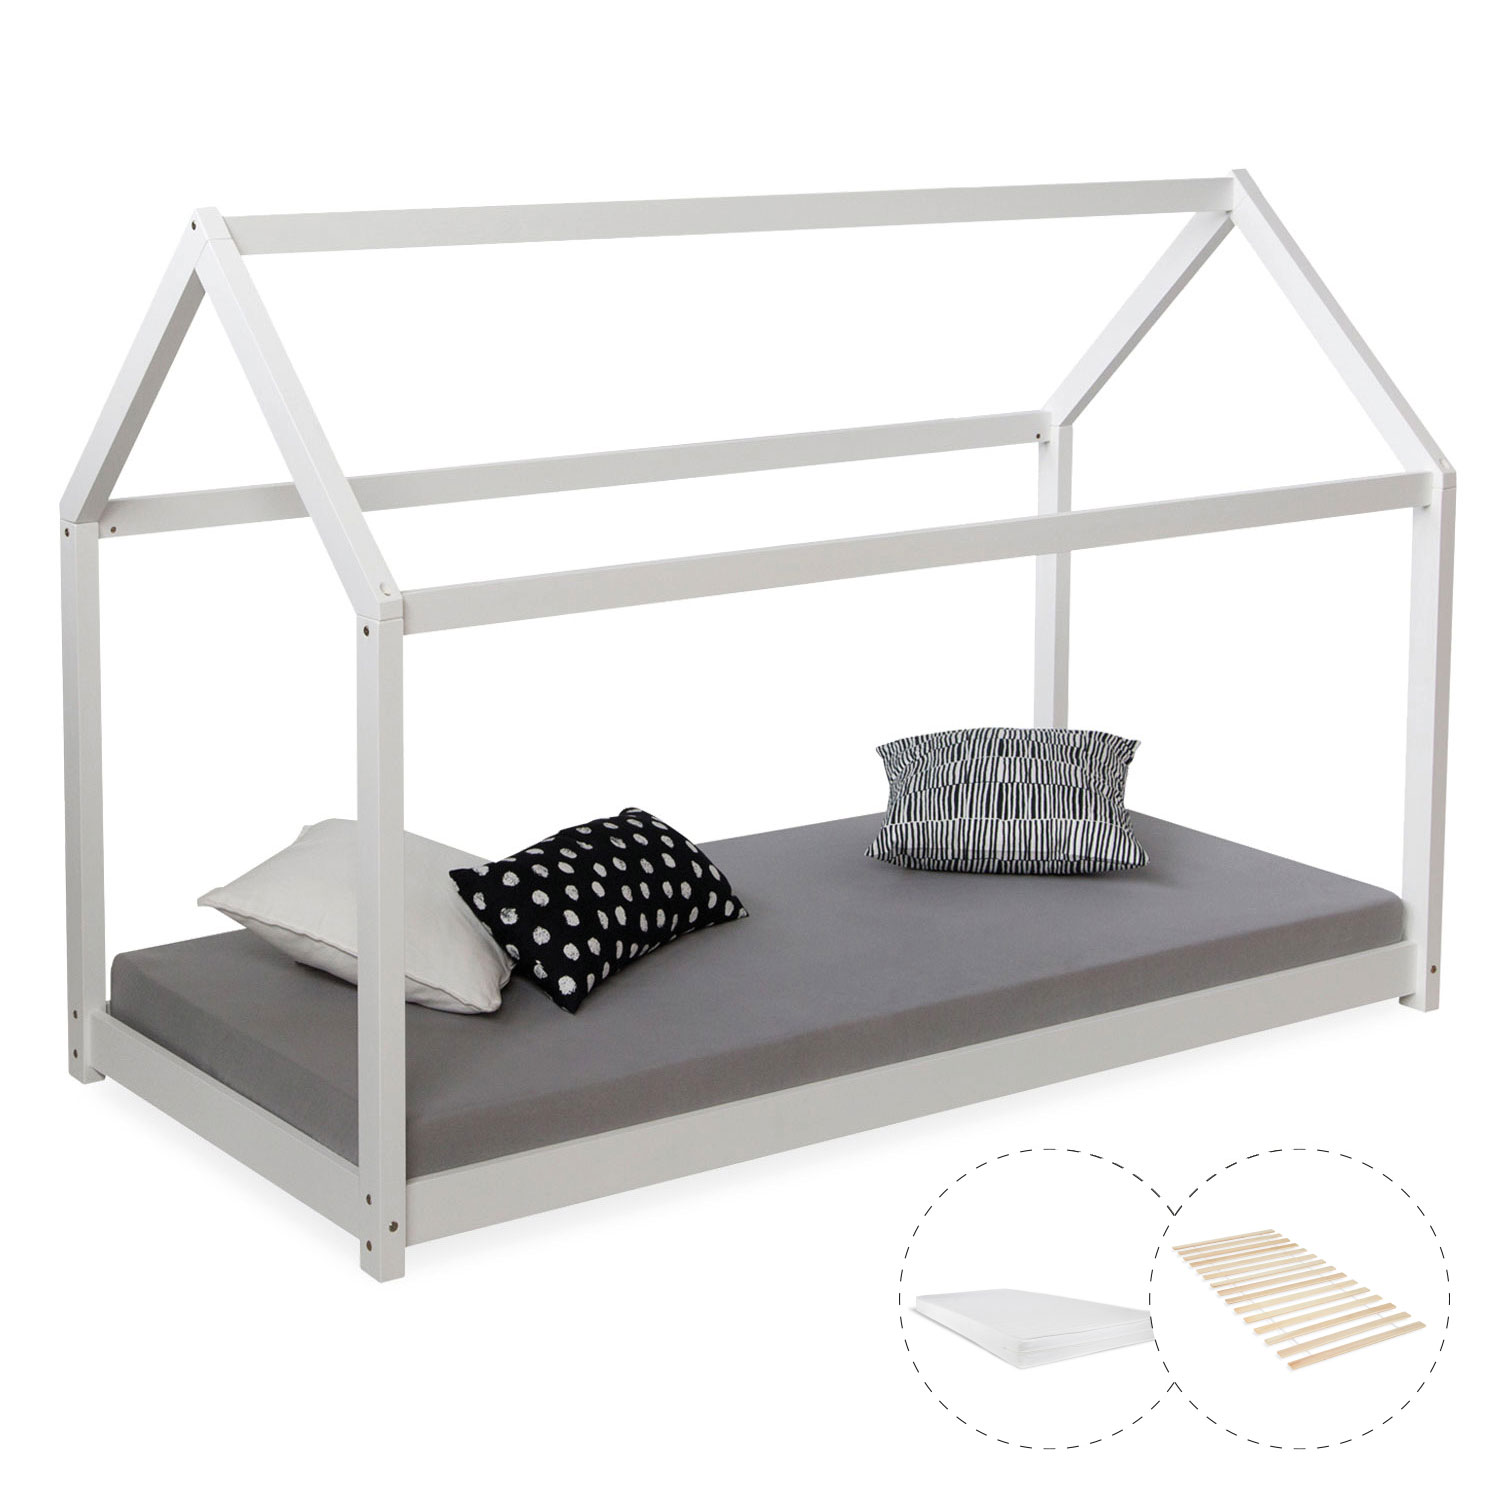 Cot Children's House White Grey Play Bed Wooden Bed 90 x 200 cm with Mattress Slatted Frame 